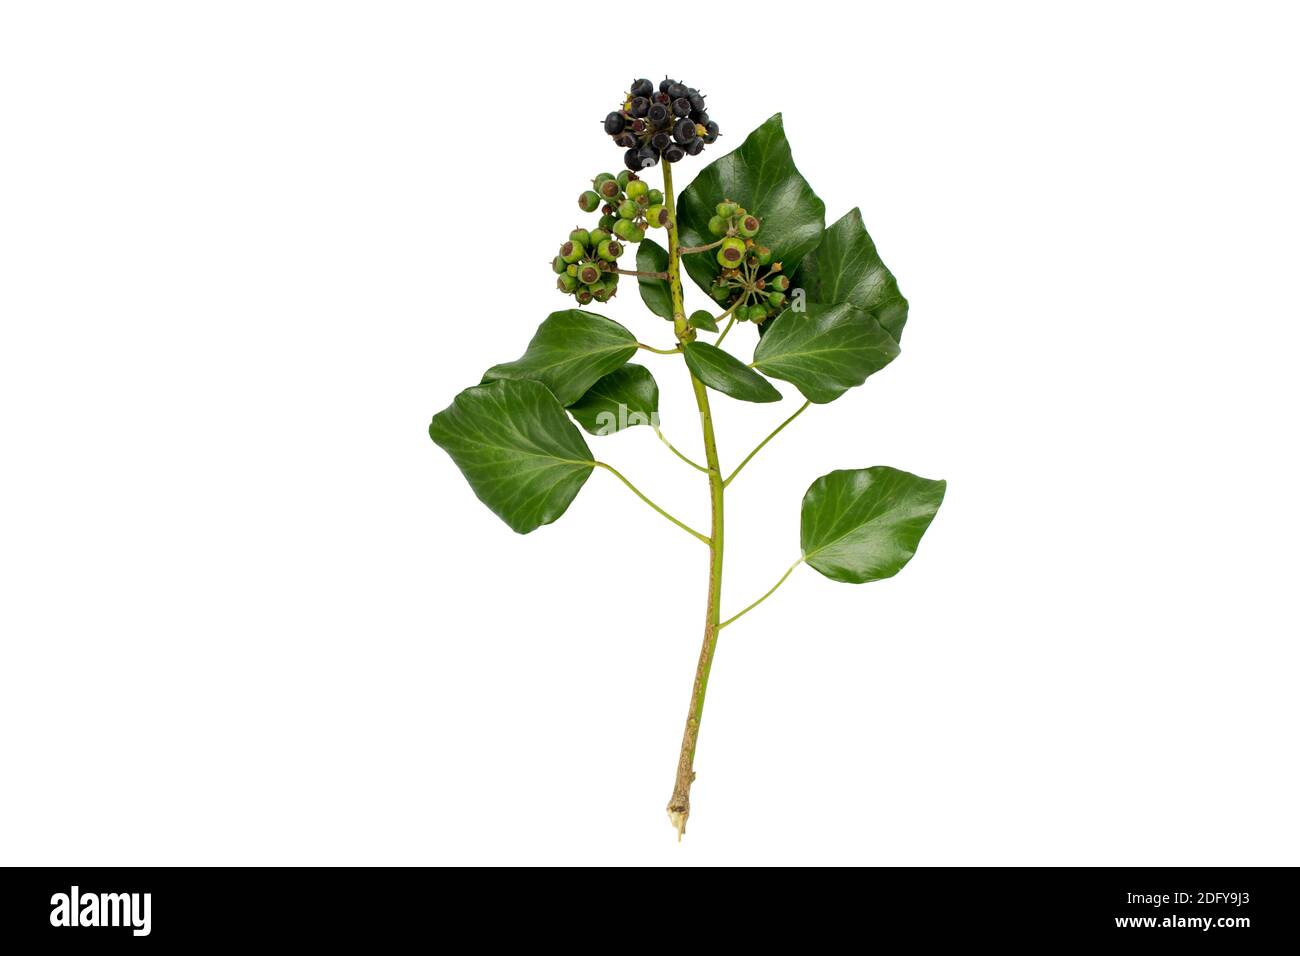 Ivy branch with leaves and berries isolated on white. Hedera helix plant. Stock Photo